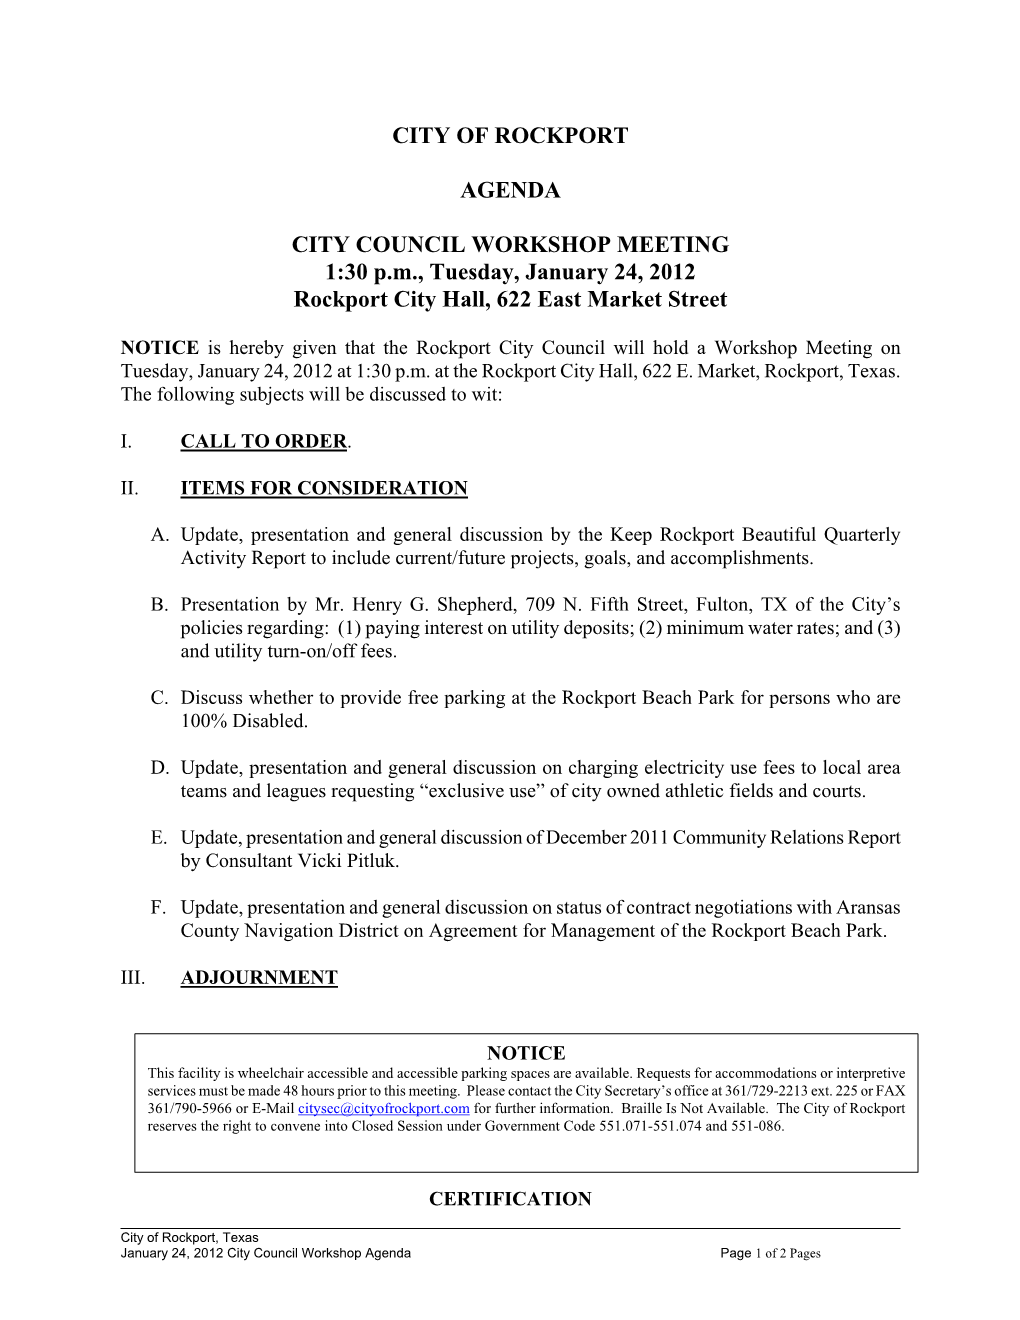 City of Rockport Agenda City Council Workshop Meeting